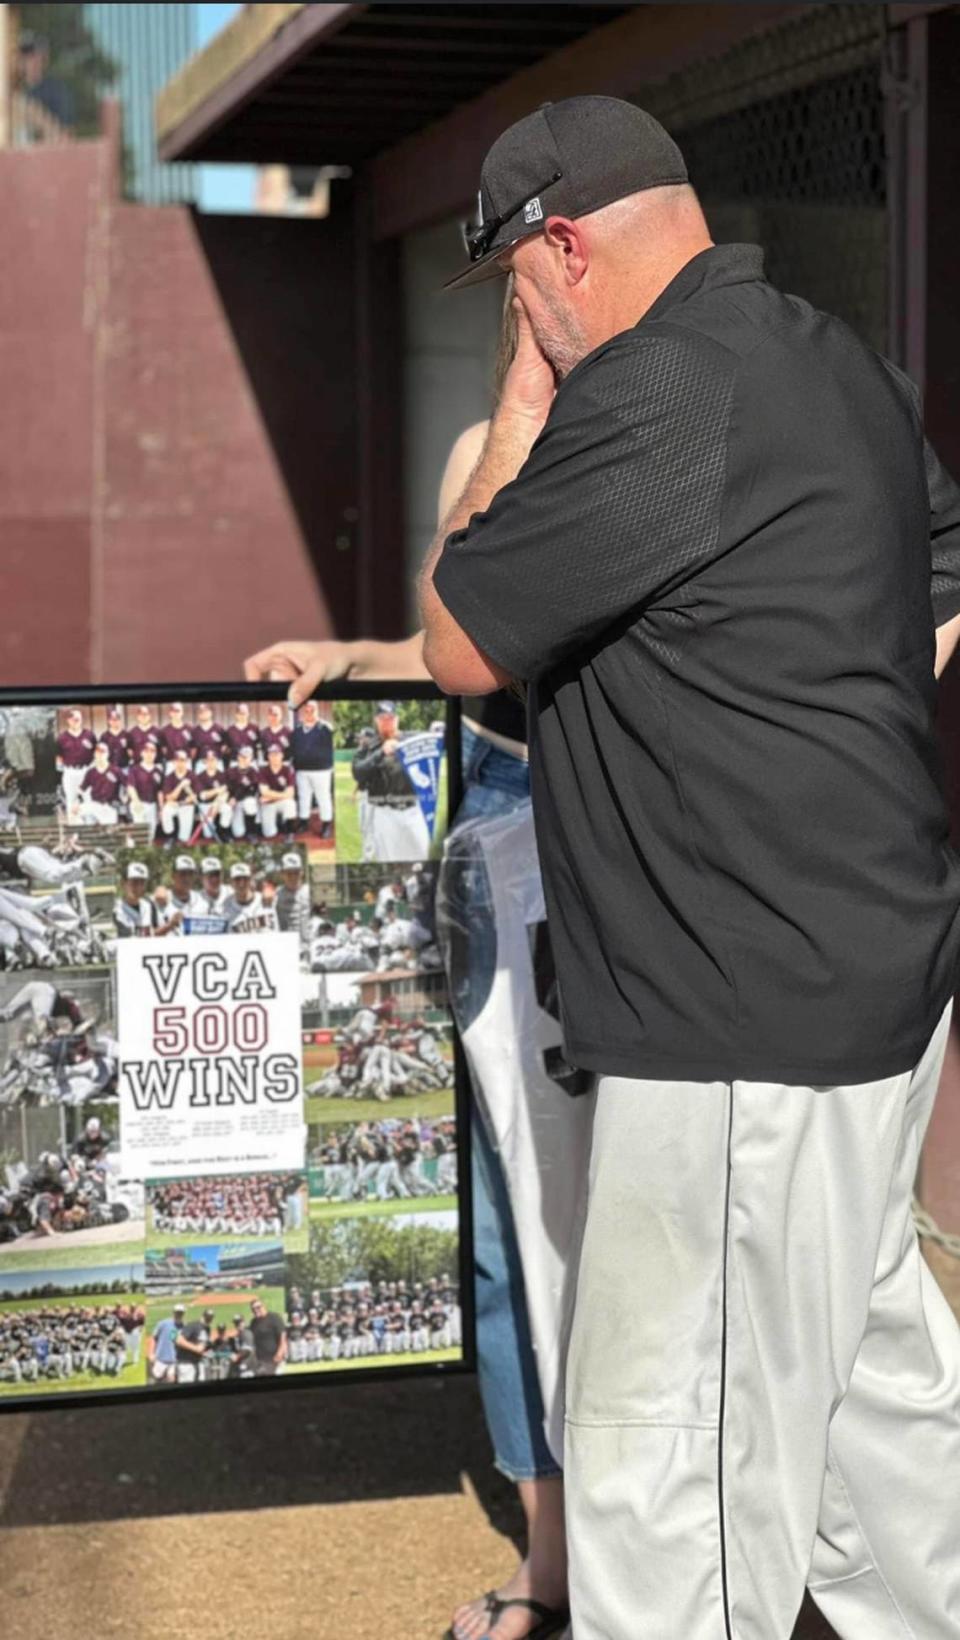 Valley Christian of Roseville baseball coach Brad Gunter Jr. is moved by winning his 500th career game with the Lions.